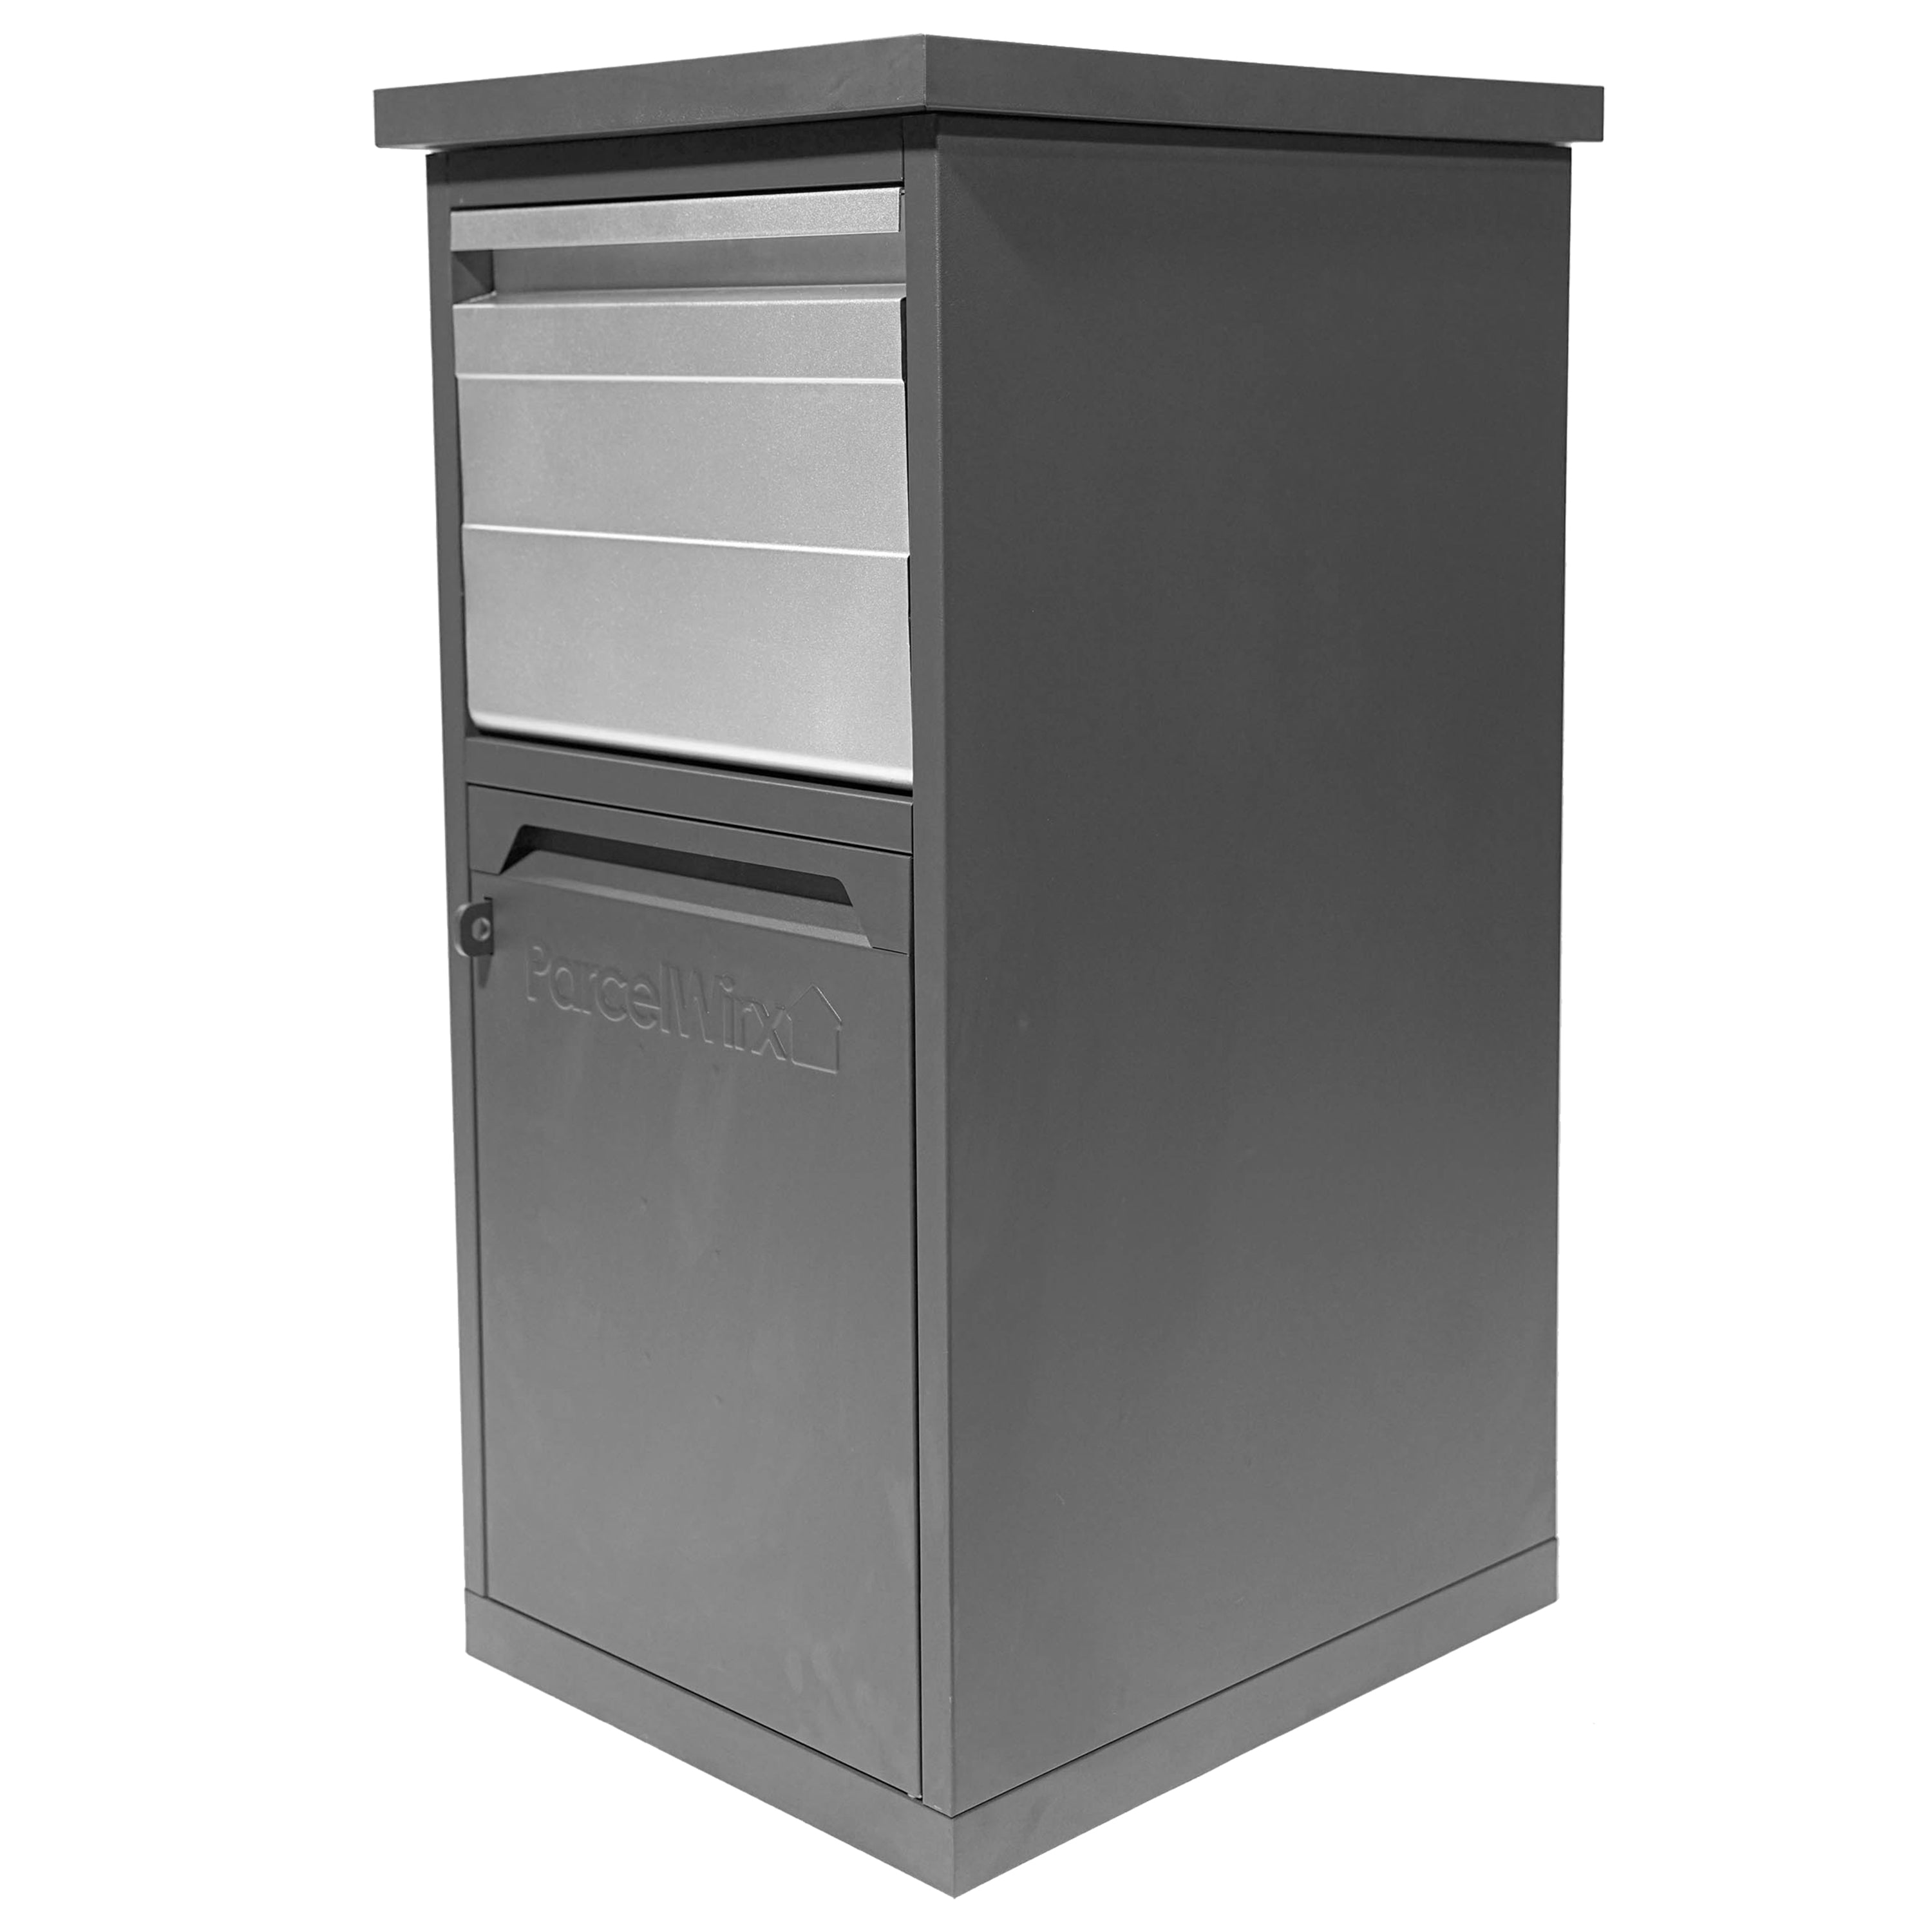 side angle of parcelwirx drop box with chute on a white background